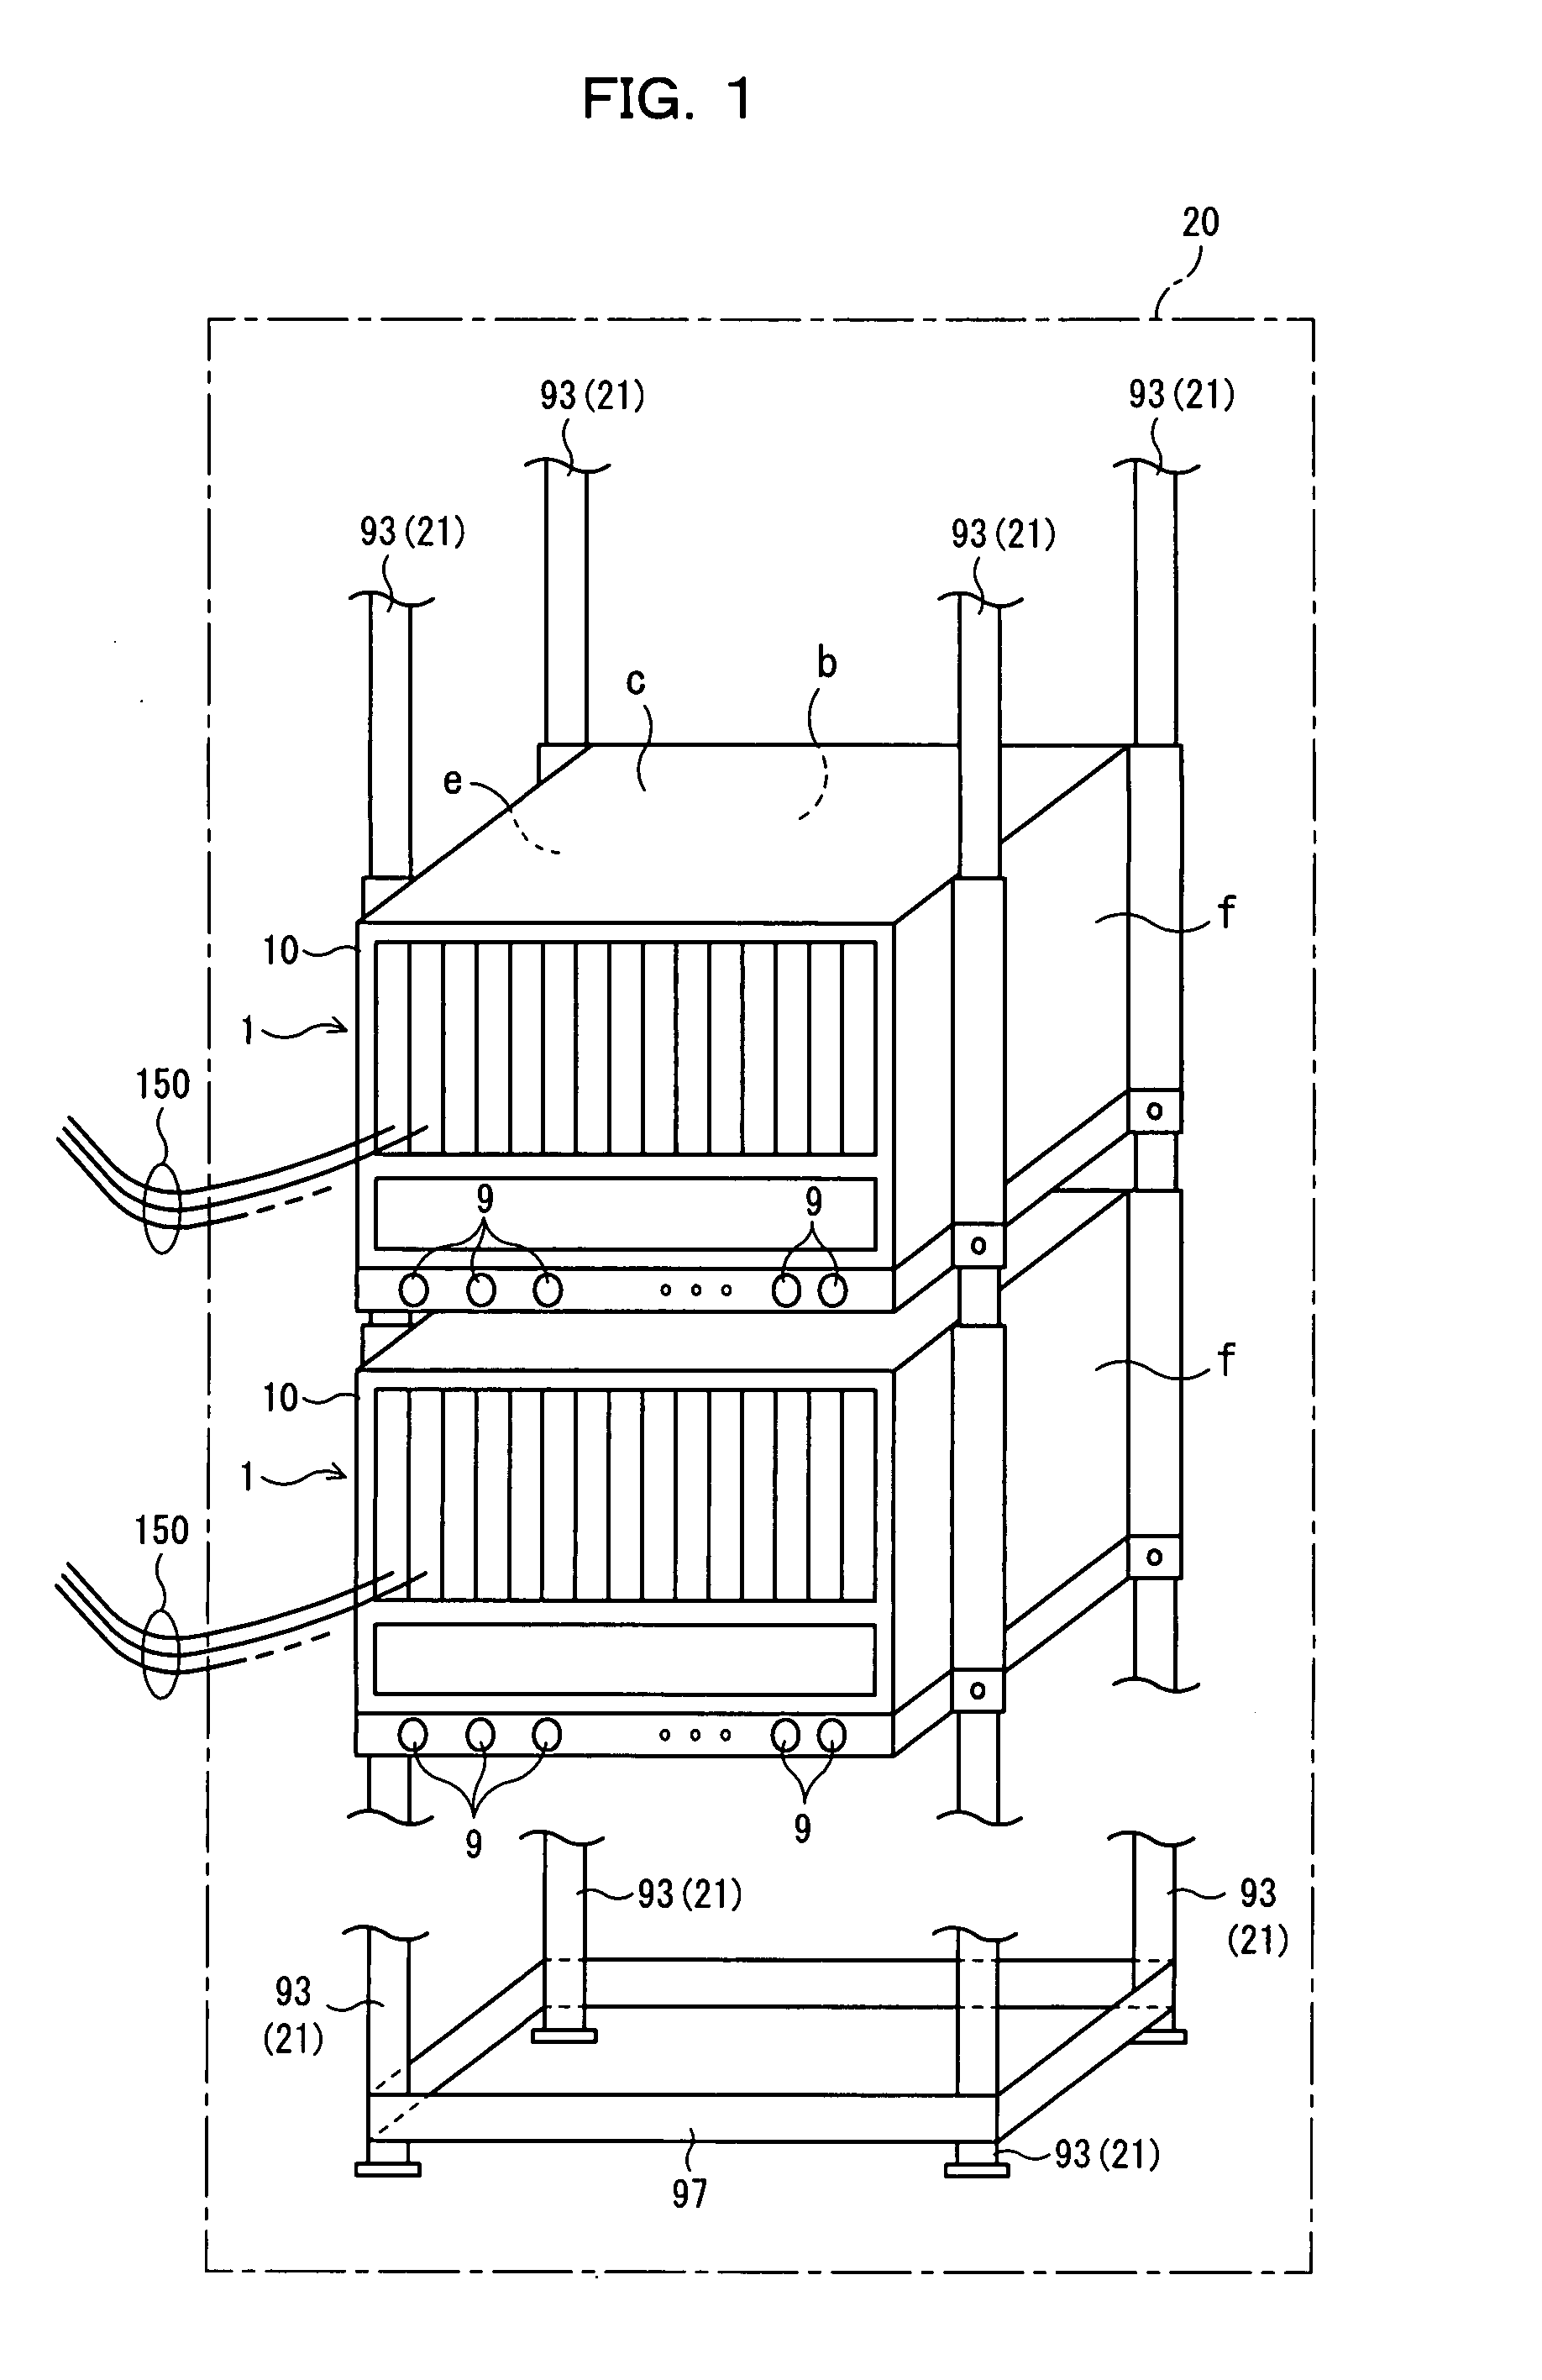 Cable connection interface for rack mount apparatus, and rack mount apparatus